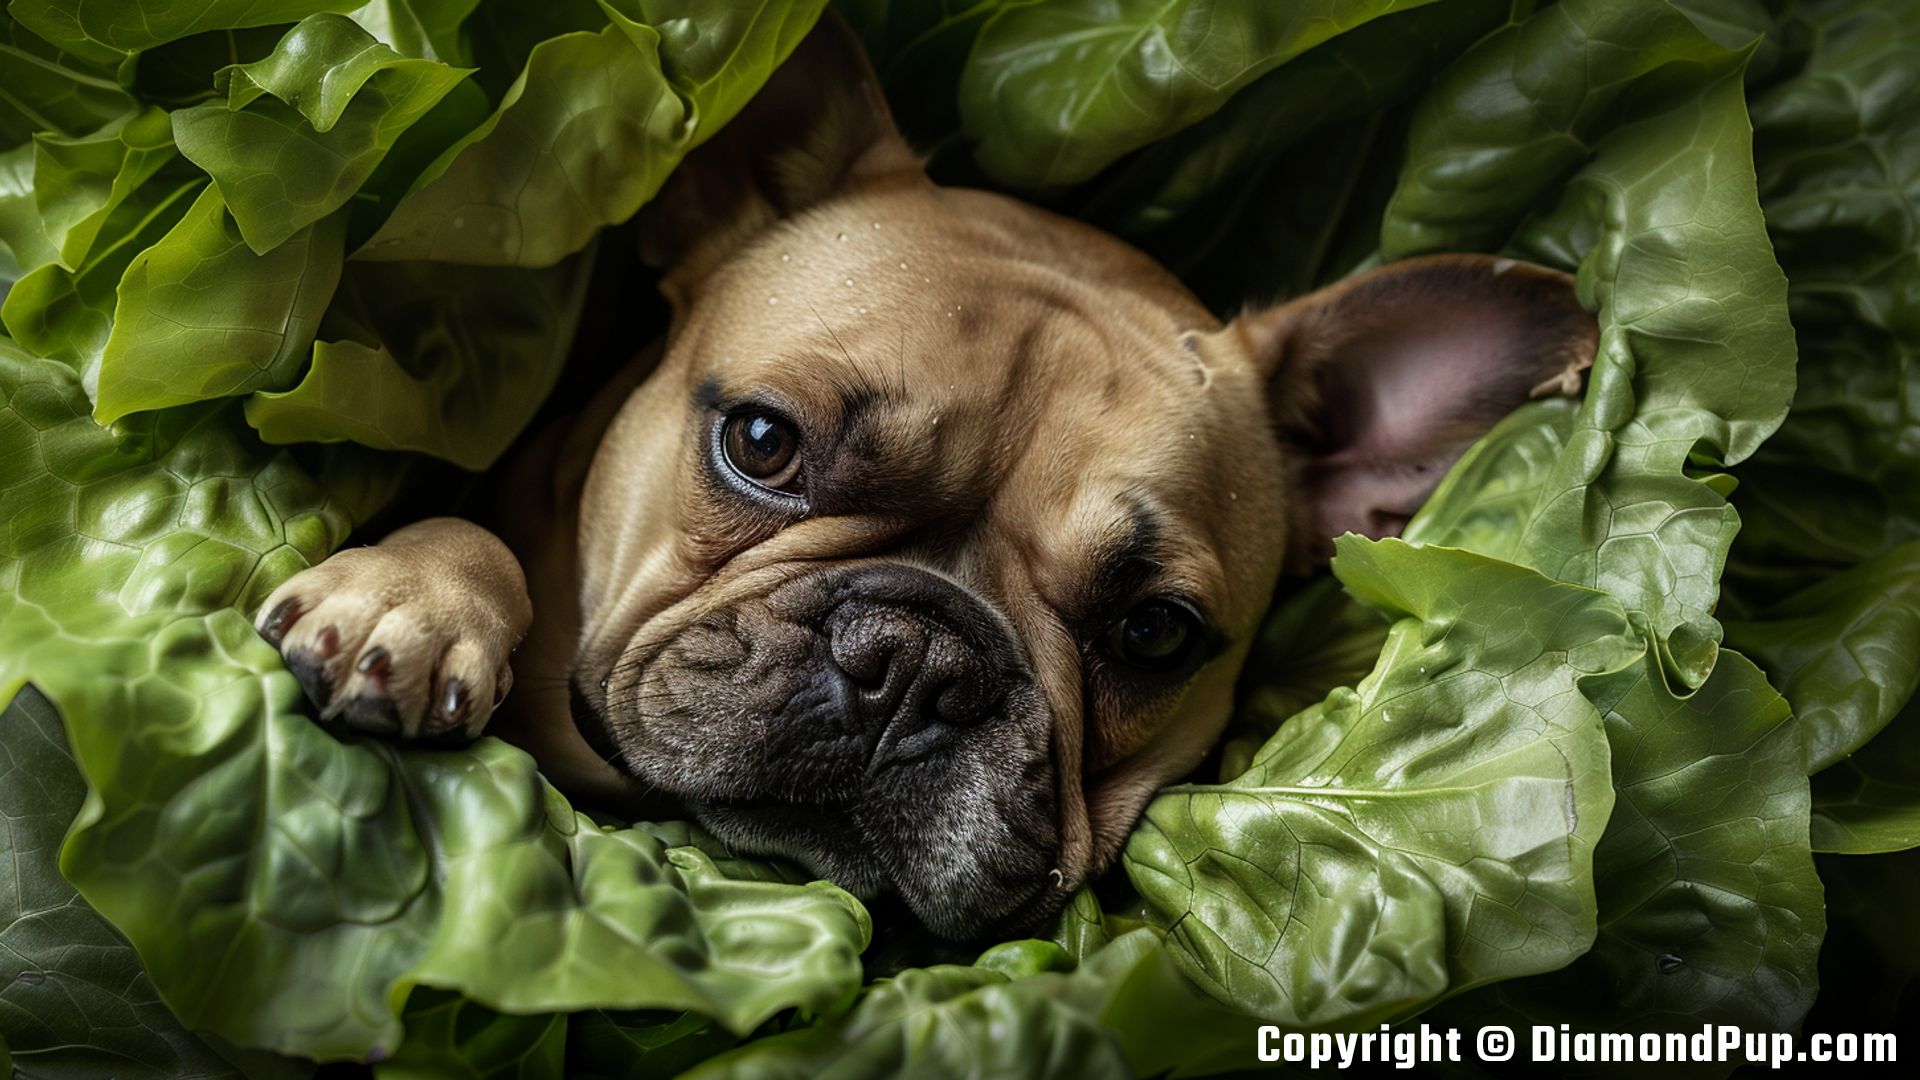 Photograph of a Playful French Bulldog Eating Lettuce